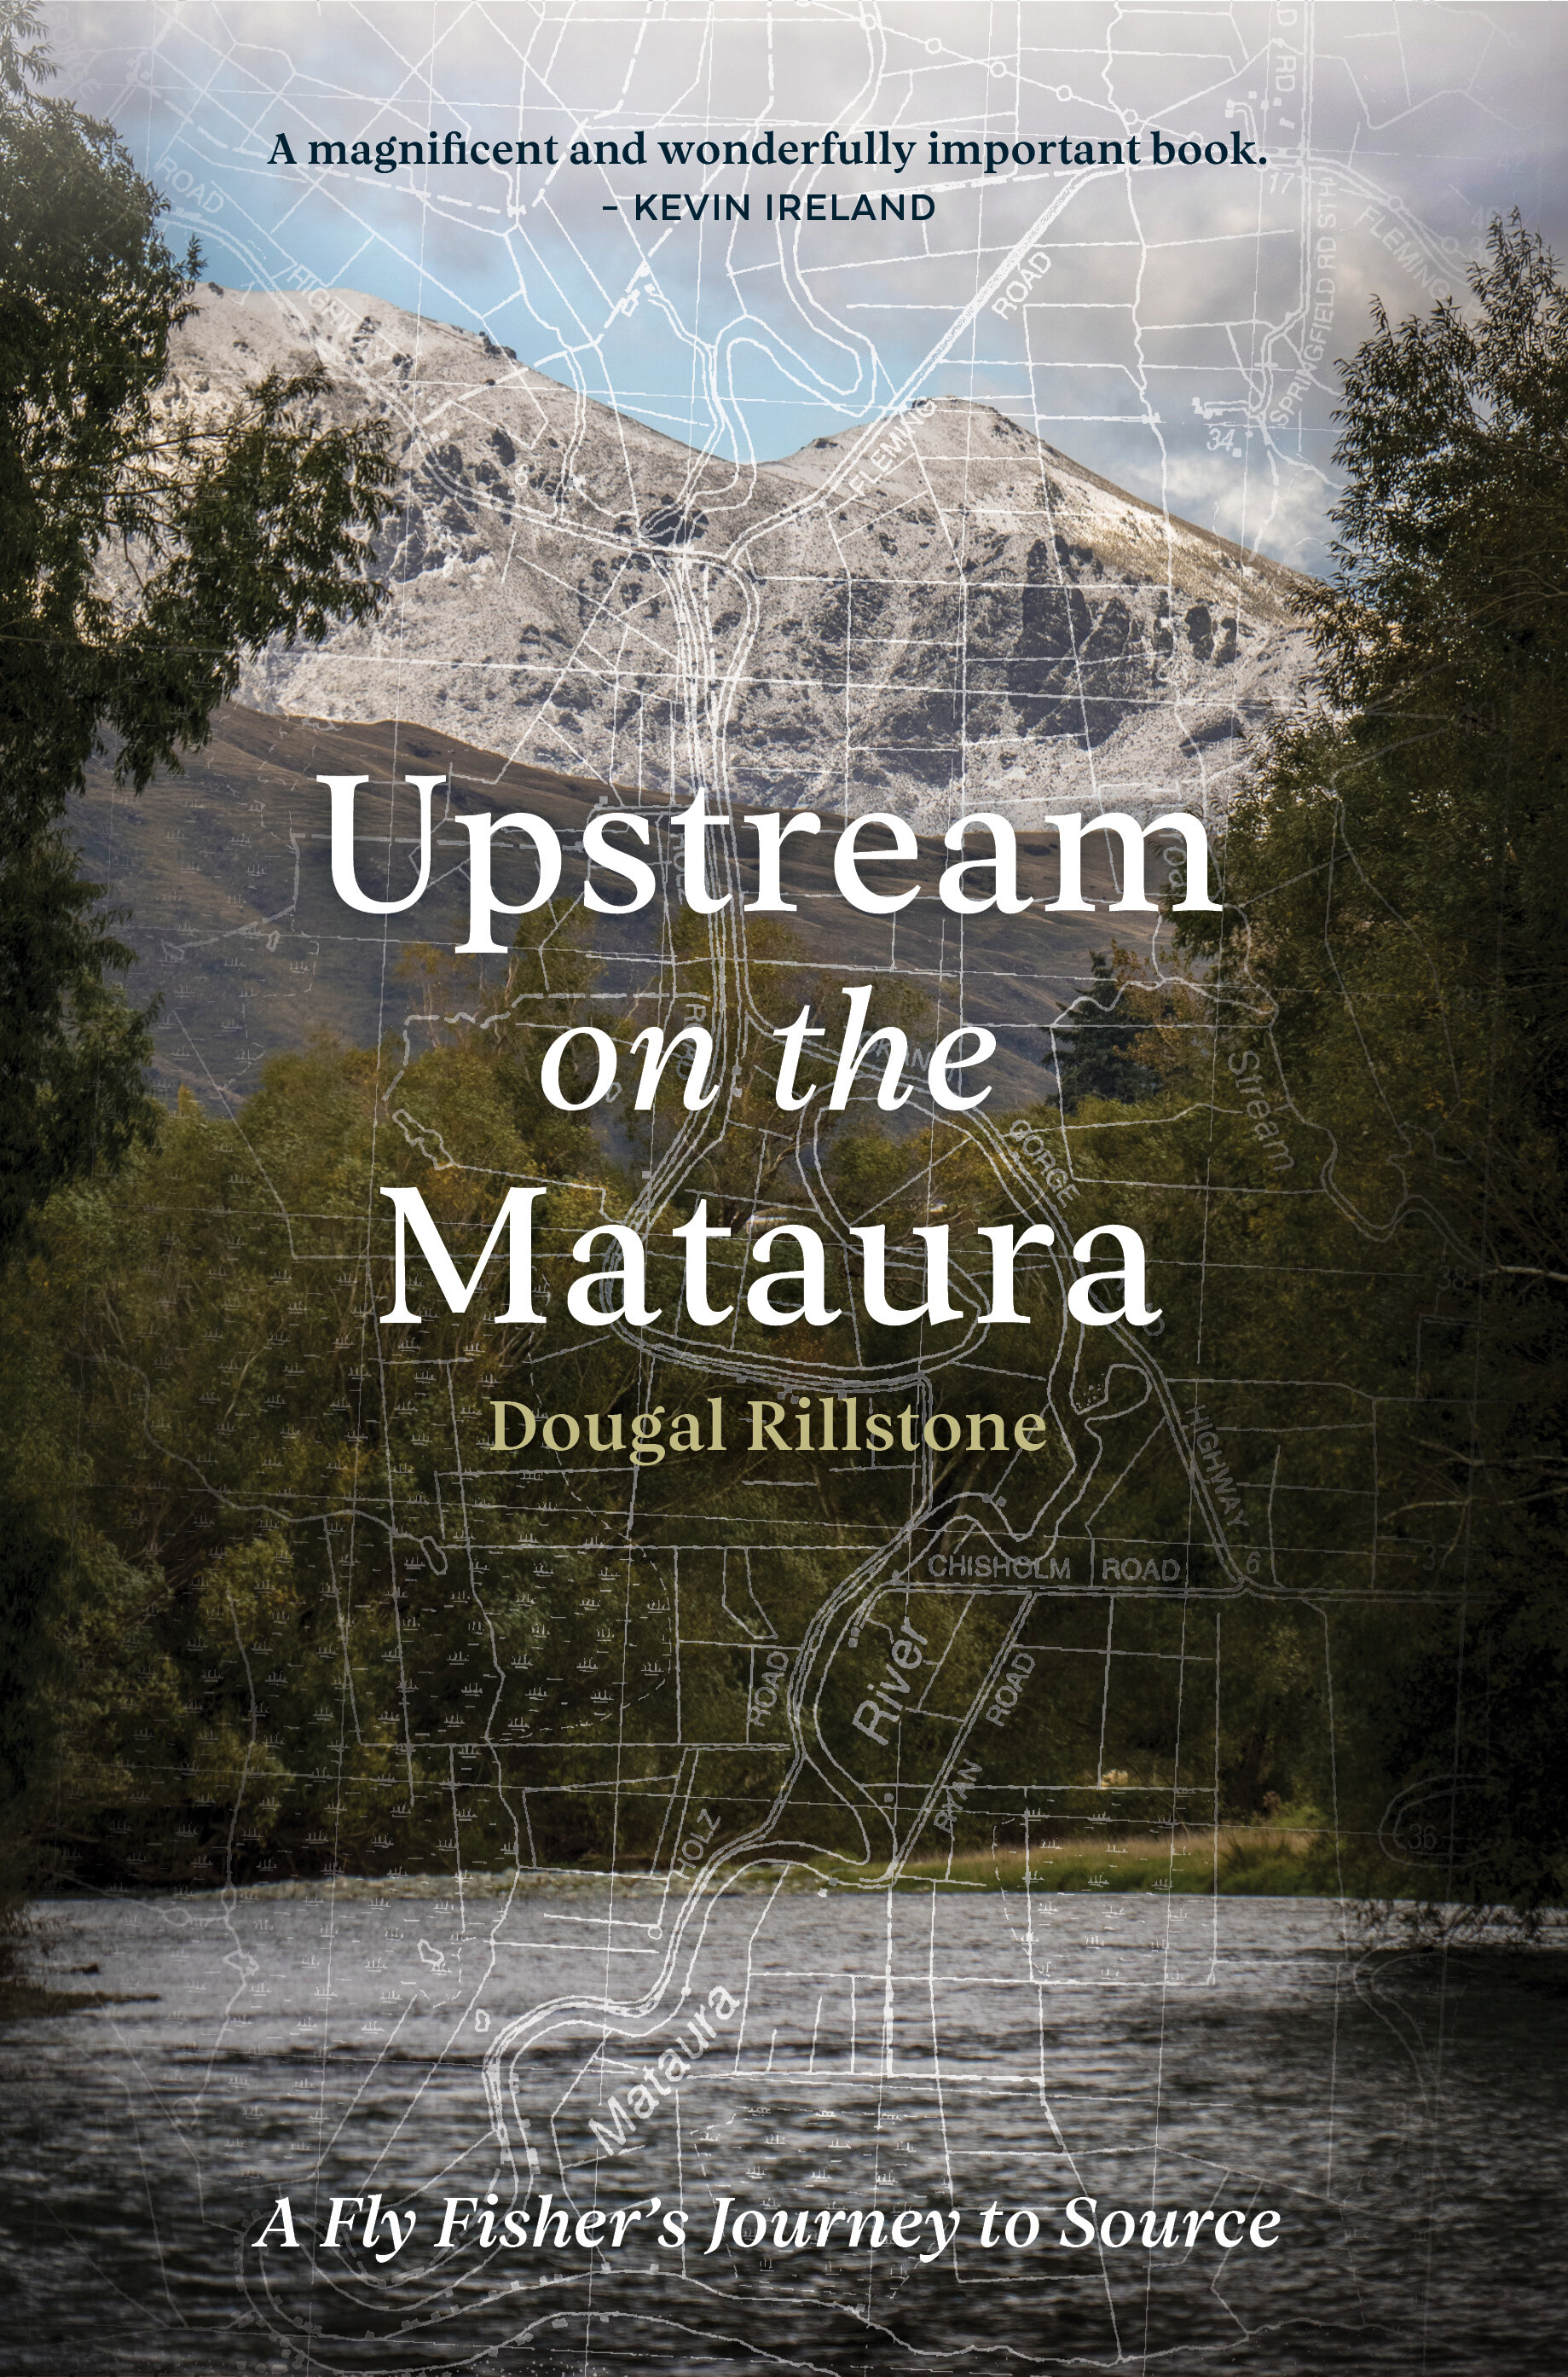  Published by Mary Egan Publishing ISBN: 978-0-473-51307-8  In the spirit of Laurie Lee’s As I Walked Out One Midsummer Morning, Dougal Rillstone’s memoir is a lyrical mediation on landscape and moving water, with angling at its heart.  Upstream on t